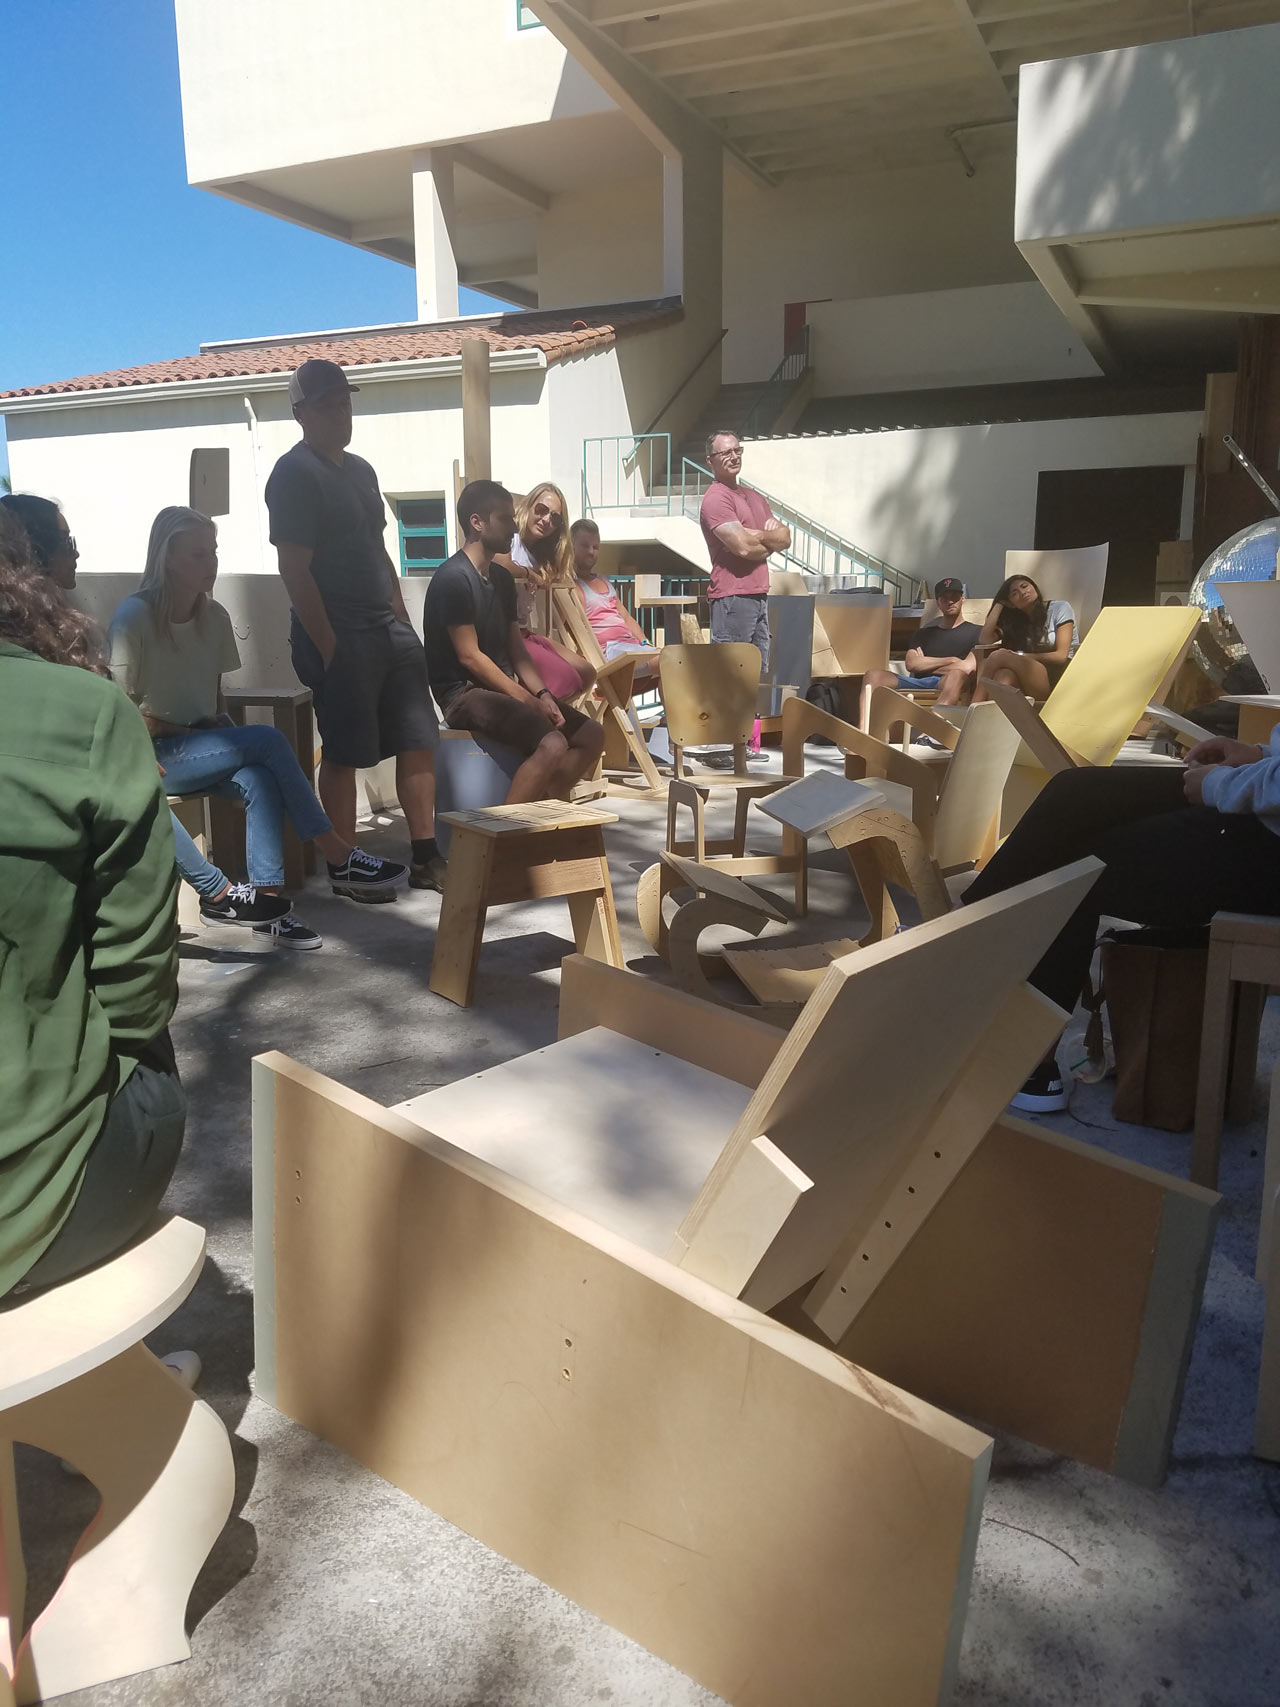 SDSU “Quick and Dirty” Chair Exercise